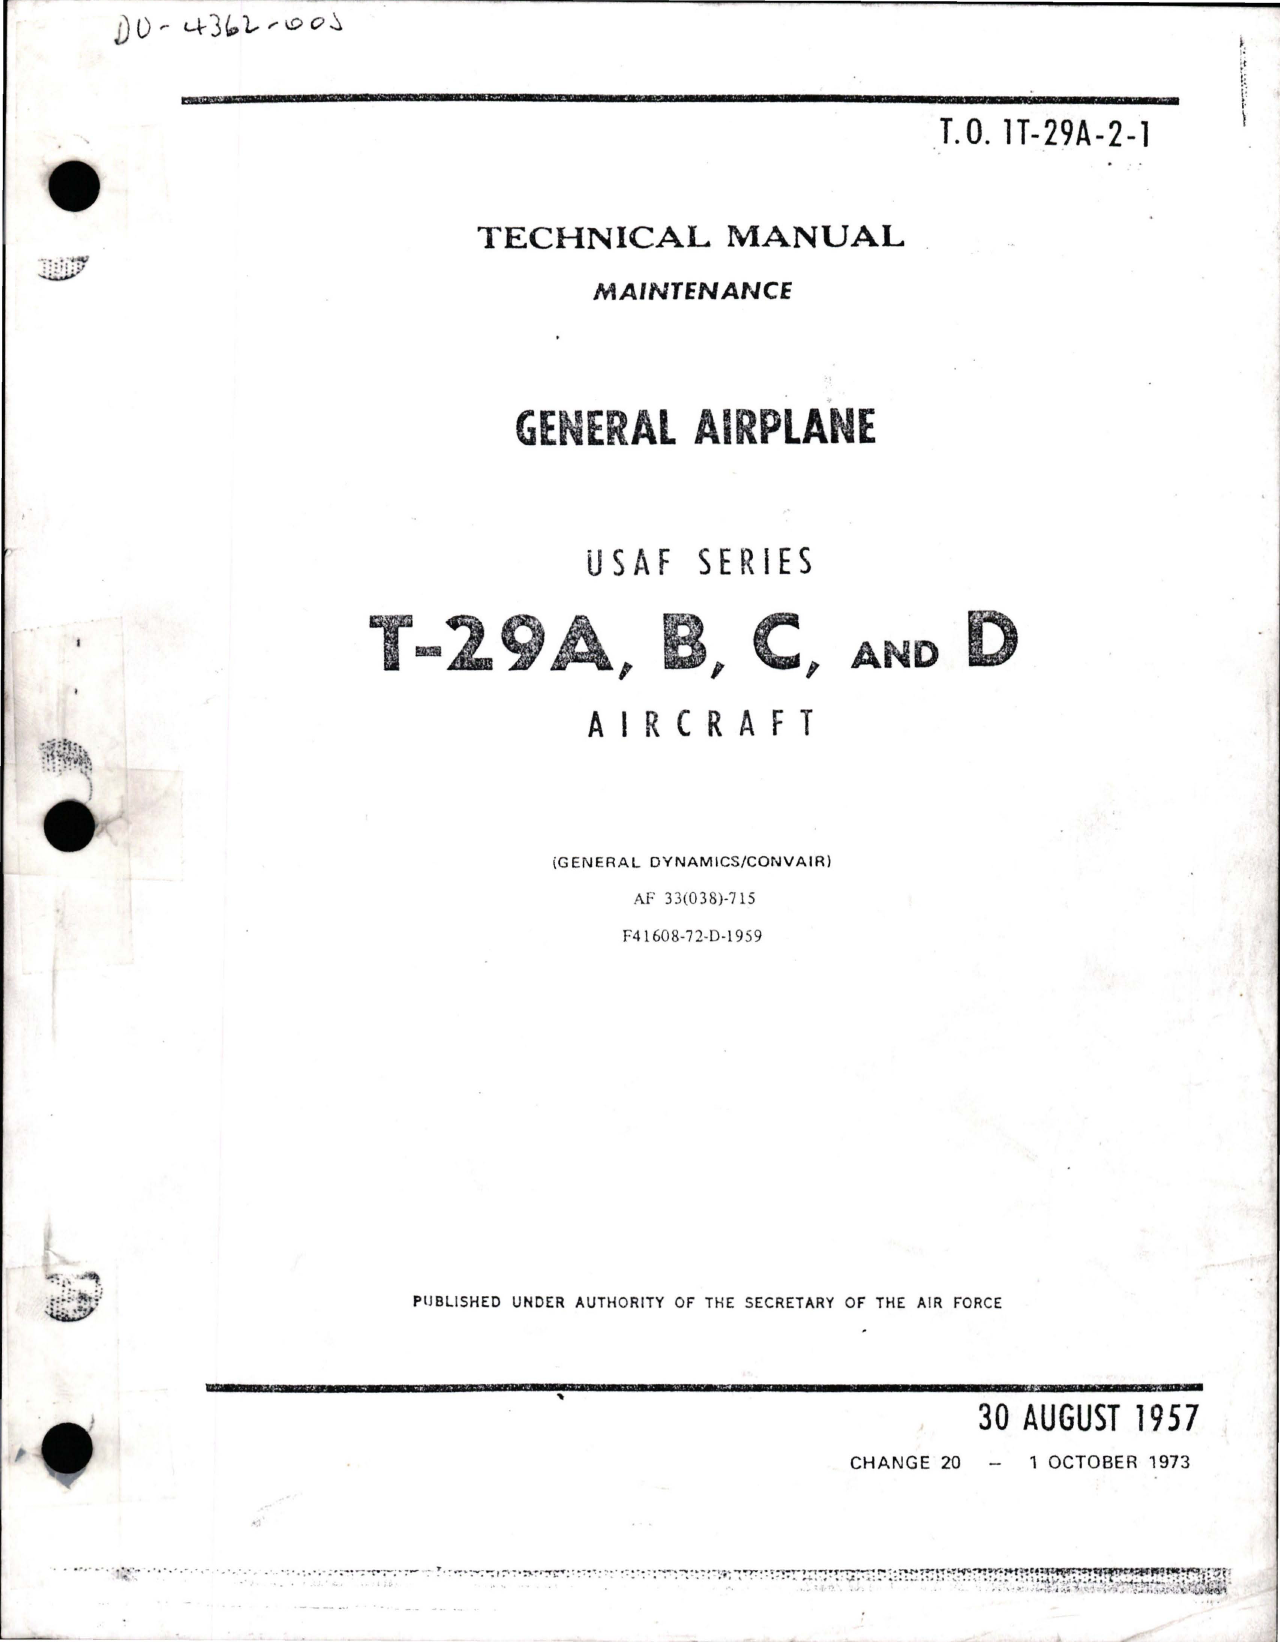 Sample page 1 from AirCorps Library document: Maintenance for General Airplane - T-29A, T-29B, T-29C and T-29D